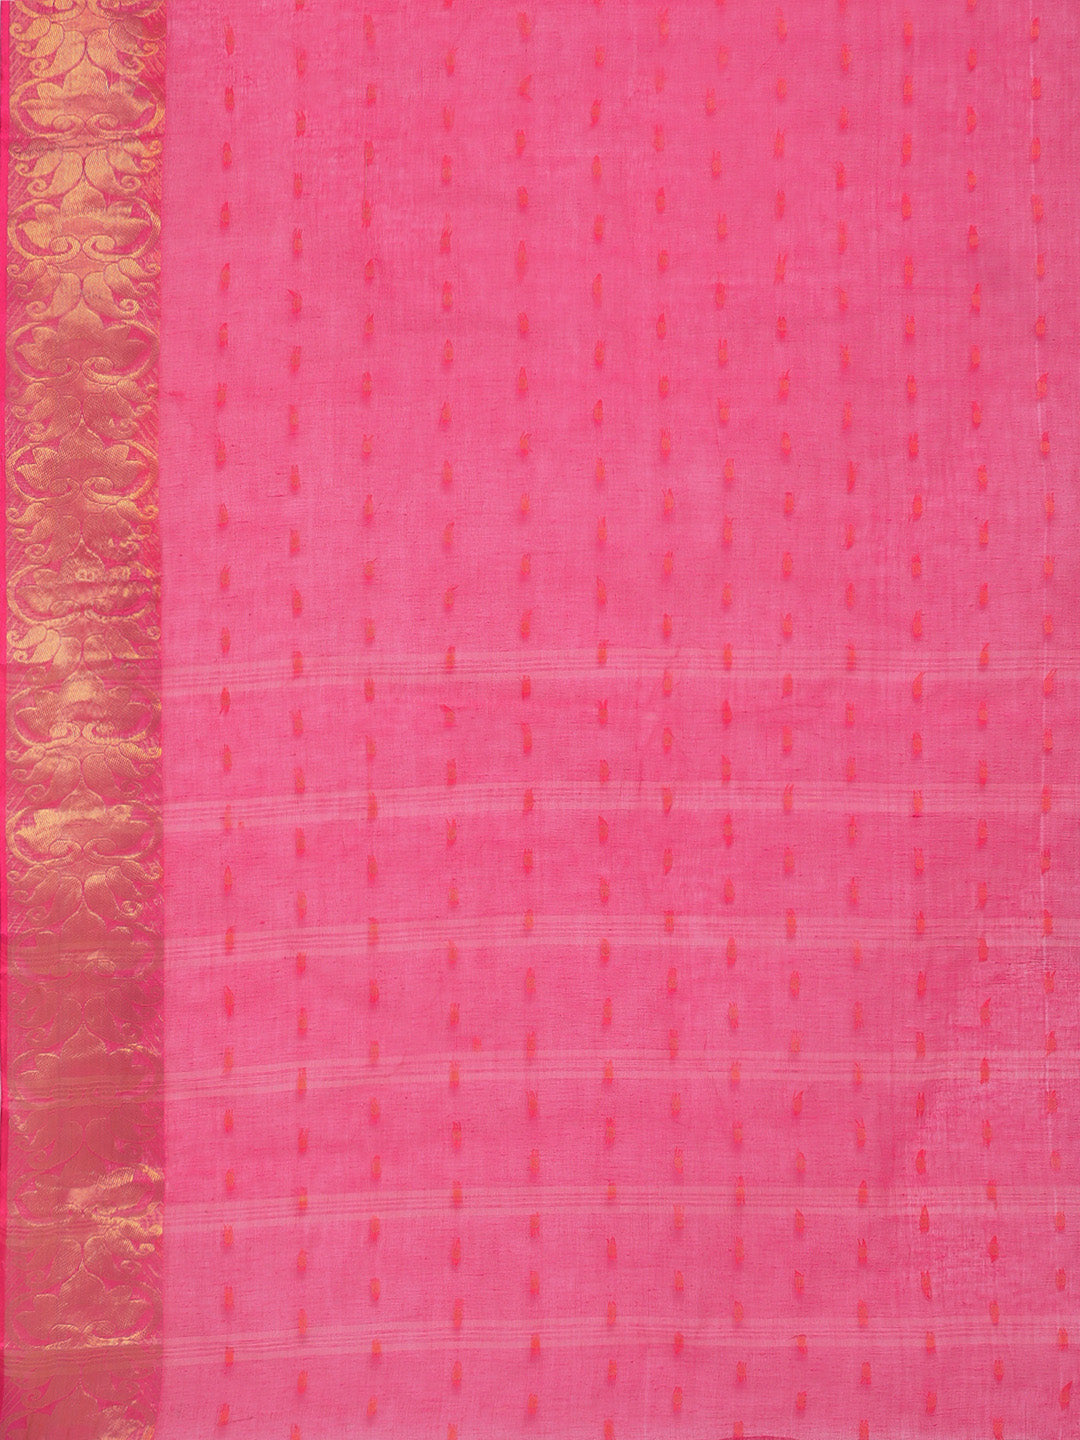 Pink Tant Woven Design Saree Without Blouse Piece DUTASA029 DUTASA029-Saree-Kalakari India-DUTASA029-Geographical Indication, Hand Crafted, Heritage Prints, Natural Dyes, Sarees, Silk Cotton, Sustainable Fabrics, Taant, Tant, West Bengal, Woven-[Linen,Ethnic,wear,Fashionista,Handloom,Handicraft,Indigo,blockprint,block,print,Cotton,Chanderi,Blue, latest,classy,party,bollywood,trendy,summer,style,traditional,formal,elegant,unique,style,hand,block,print, dabu,booti,gift,present,glamorous,affordable